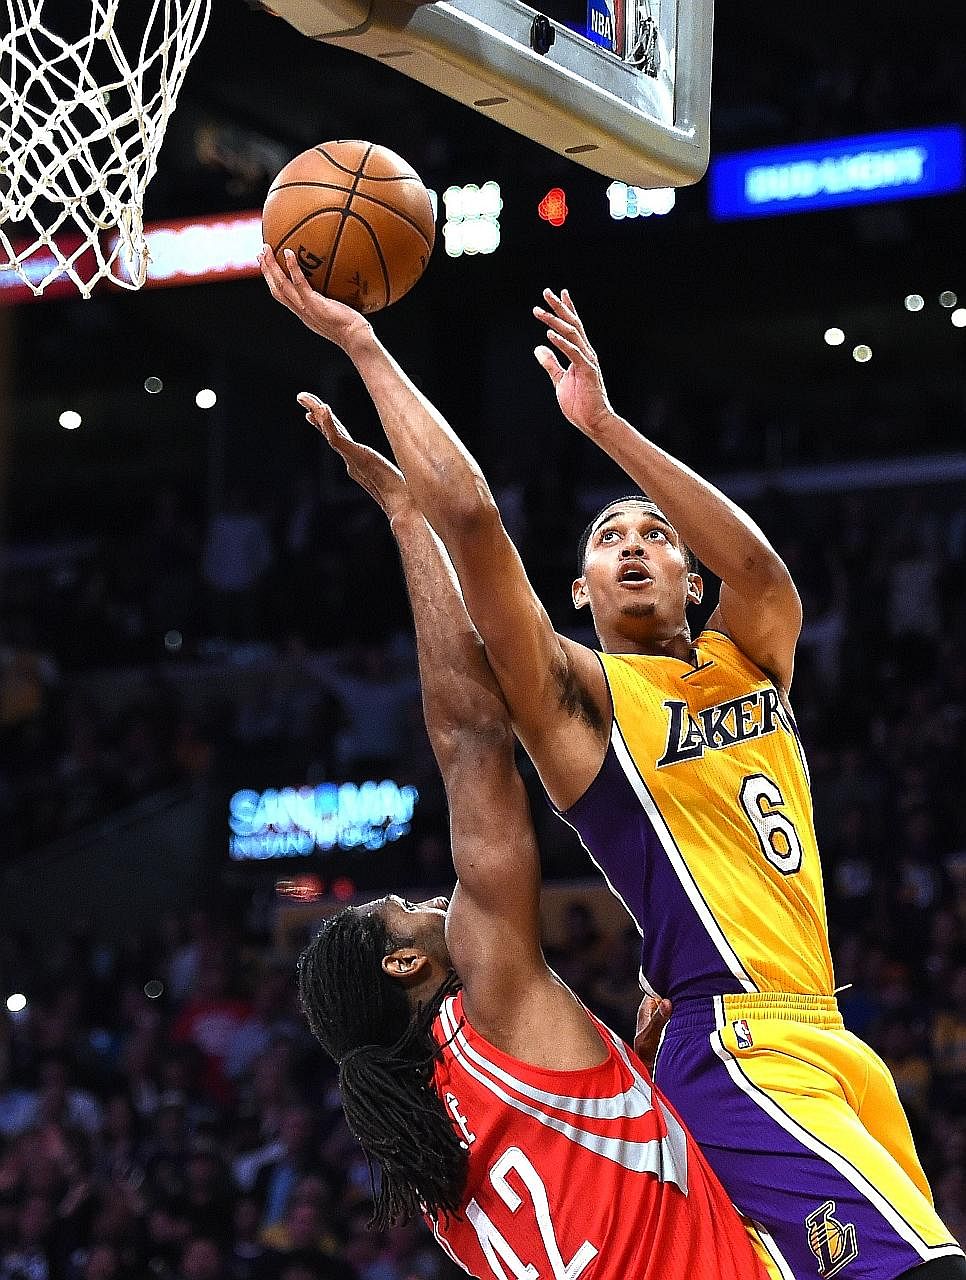 Los Angeles Lakers guard Jordan Clarkson scoring two of his team-high 25 points over the Houston Rockets' Nene Hilario during the Lakers' 120-114 season-opening win at the Staples Centre.